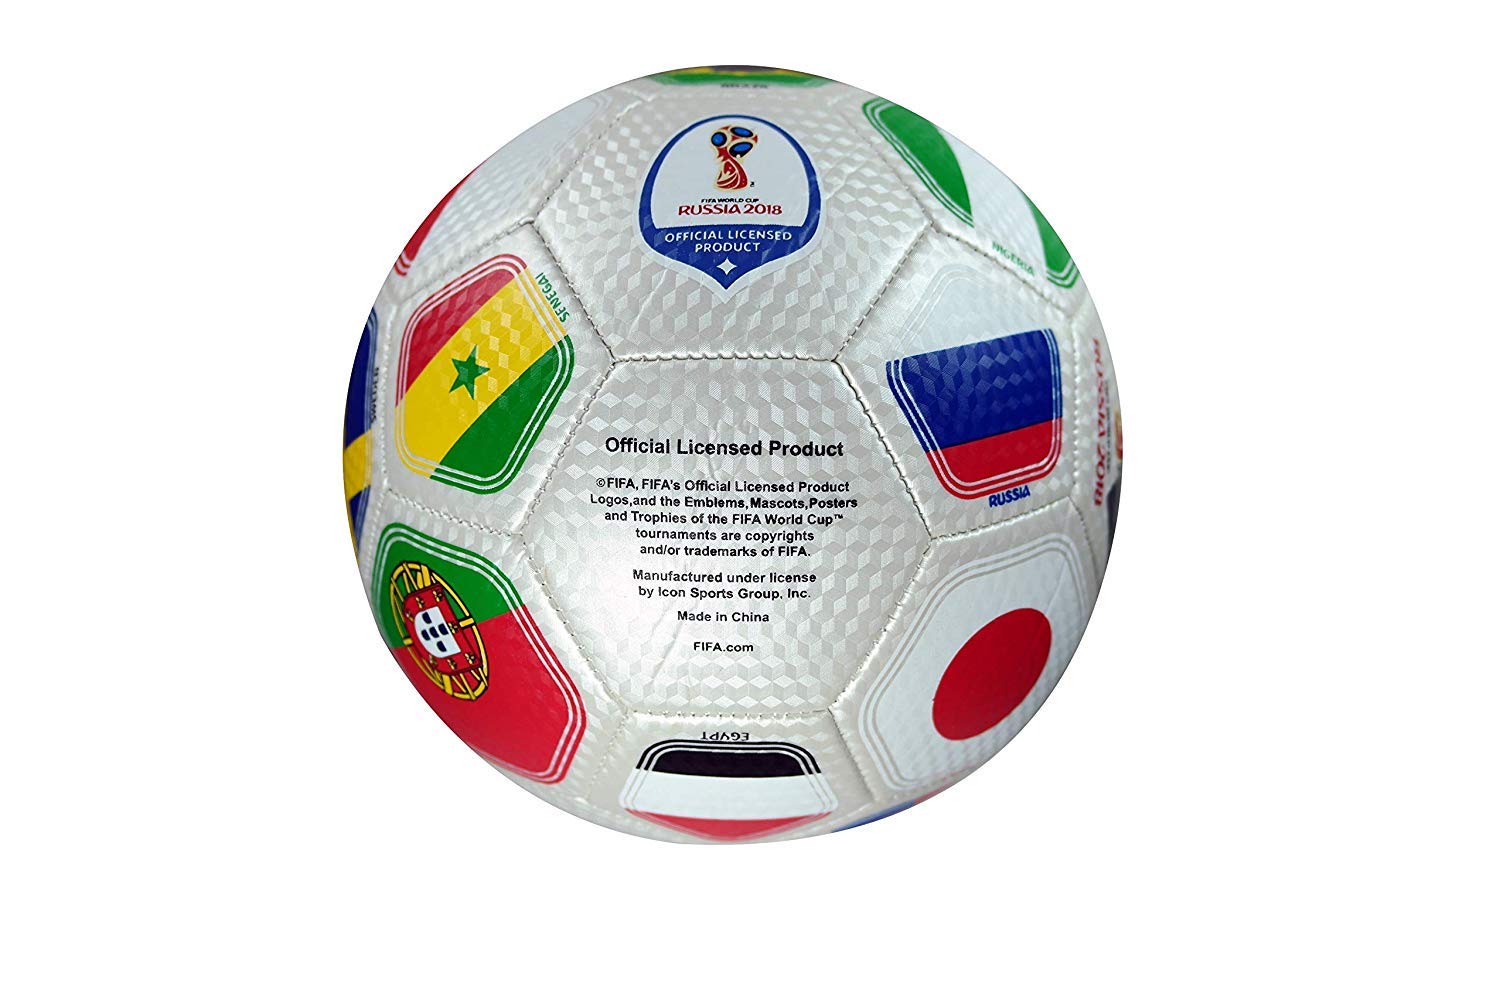 FIFA Official Russia 2018 World Cup Official Licensed Size 5 Ball 01-4 - image 3 of 3